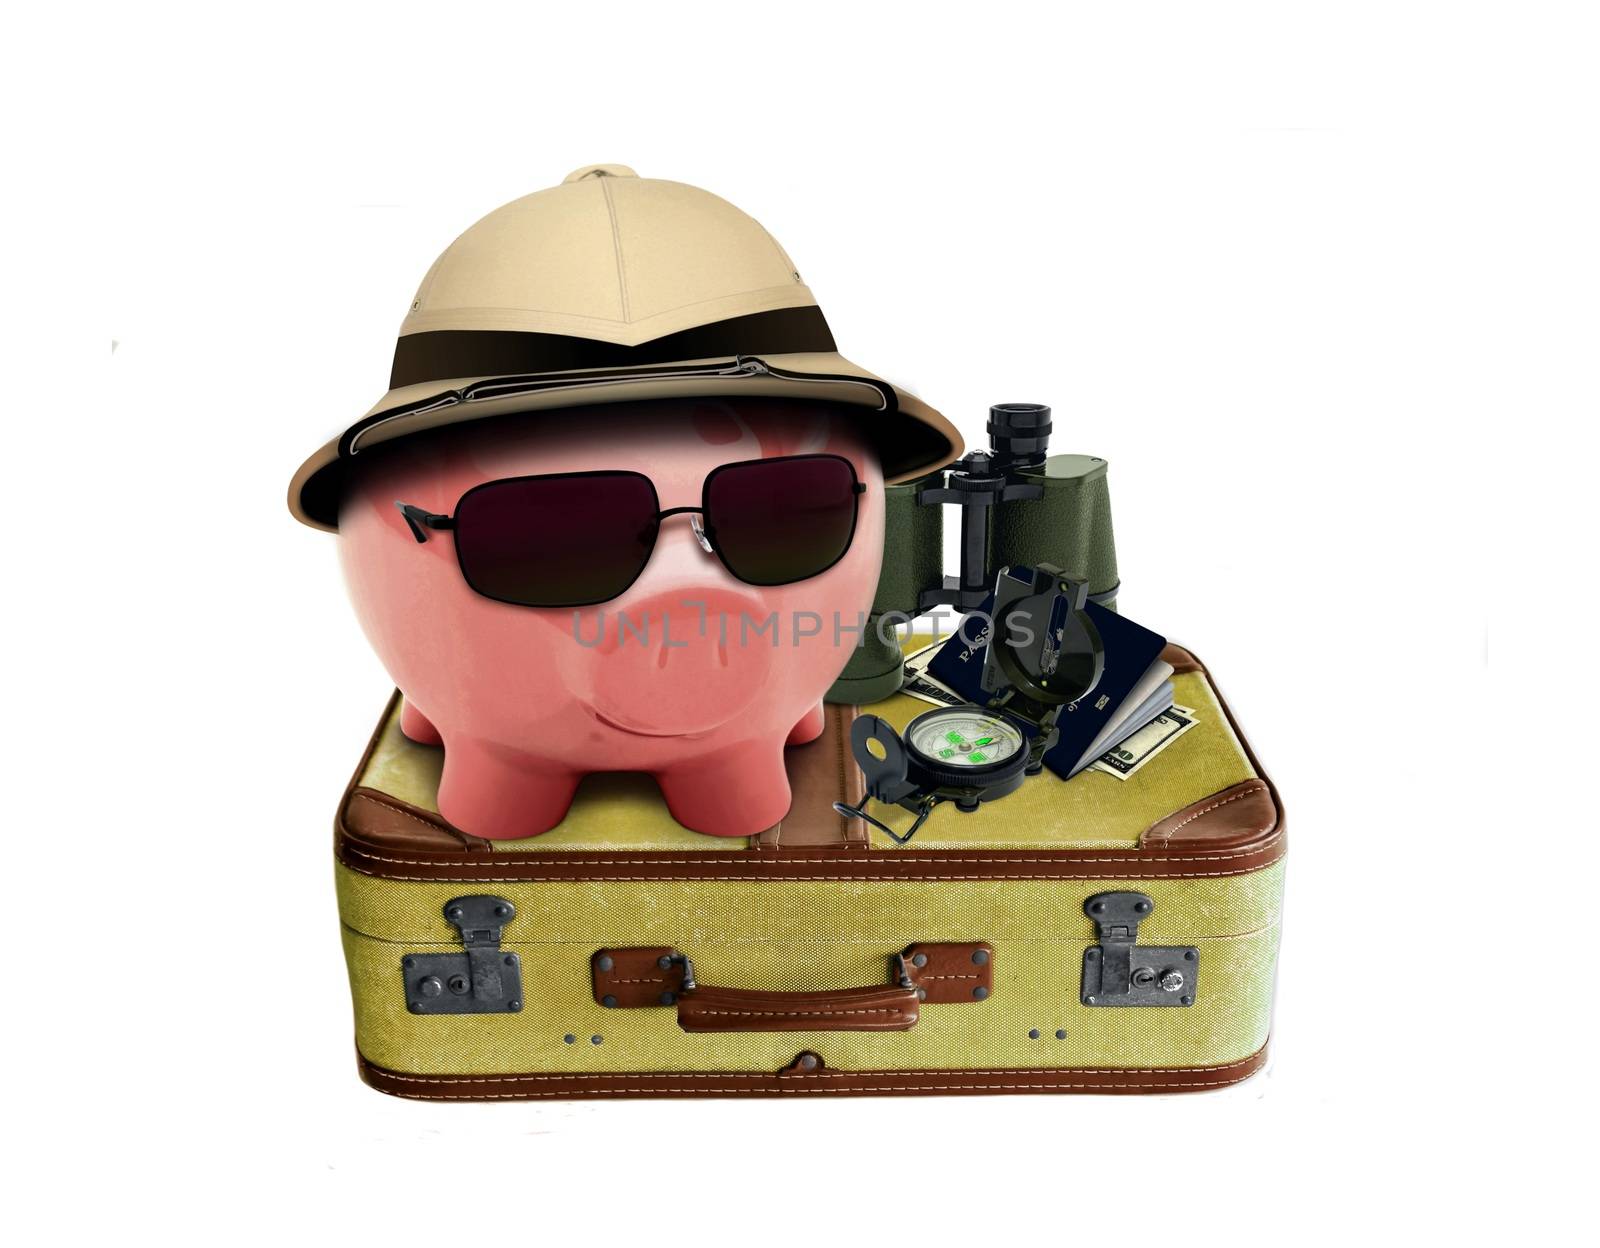 Piggy on Holiday by razihusin